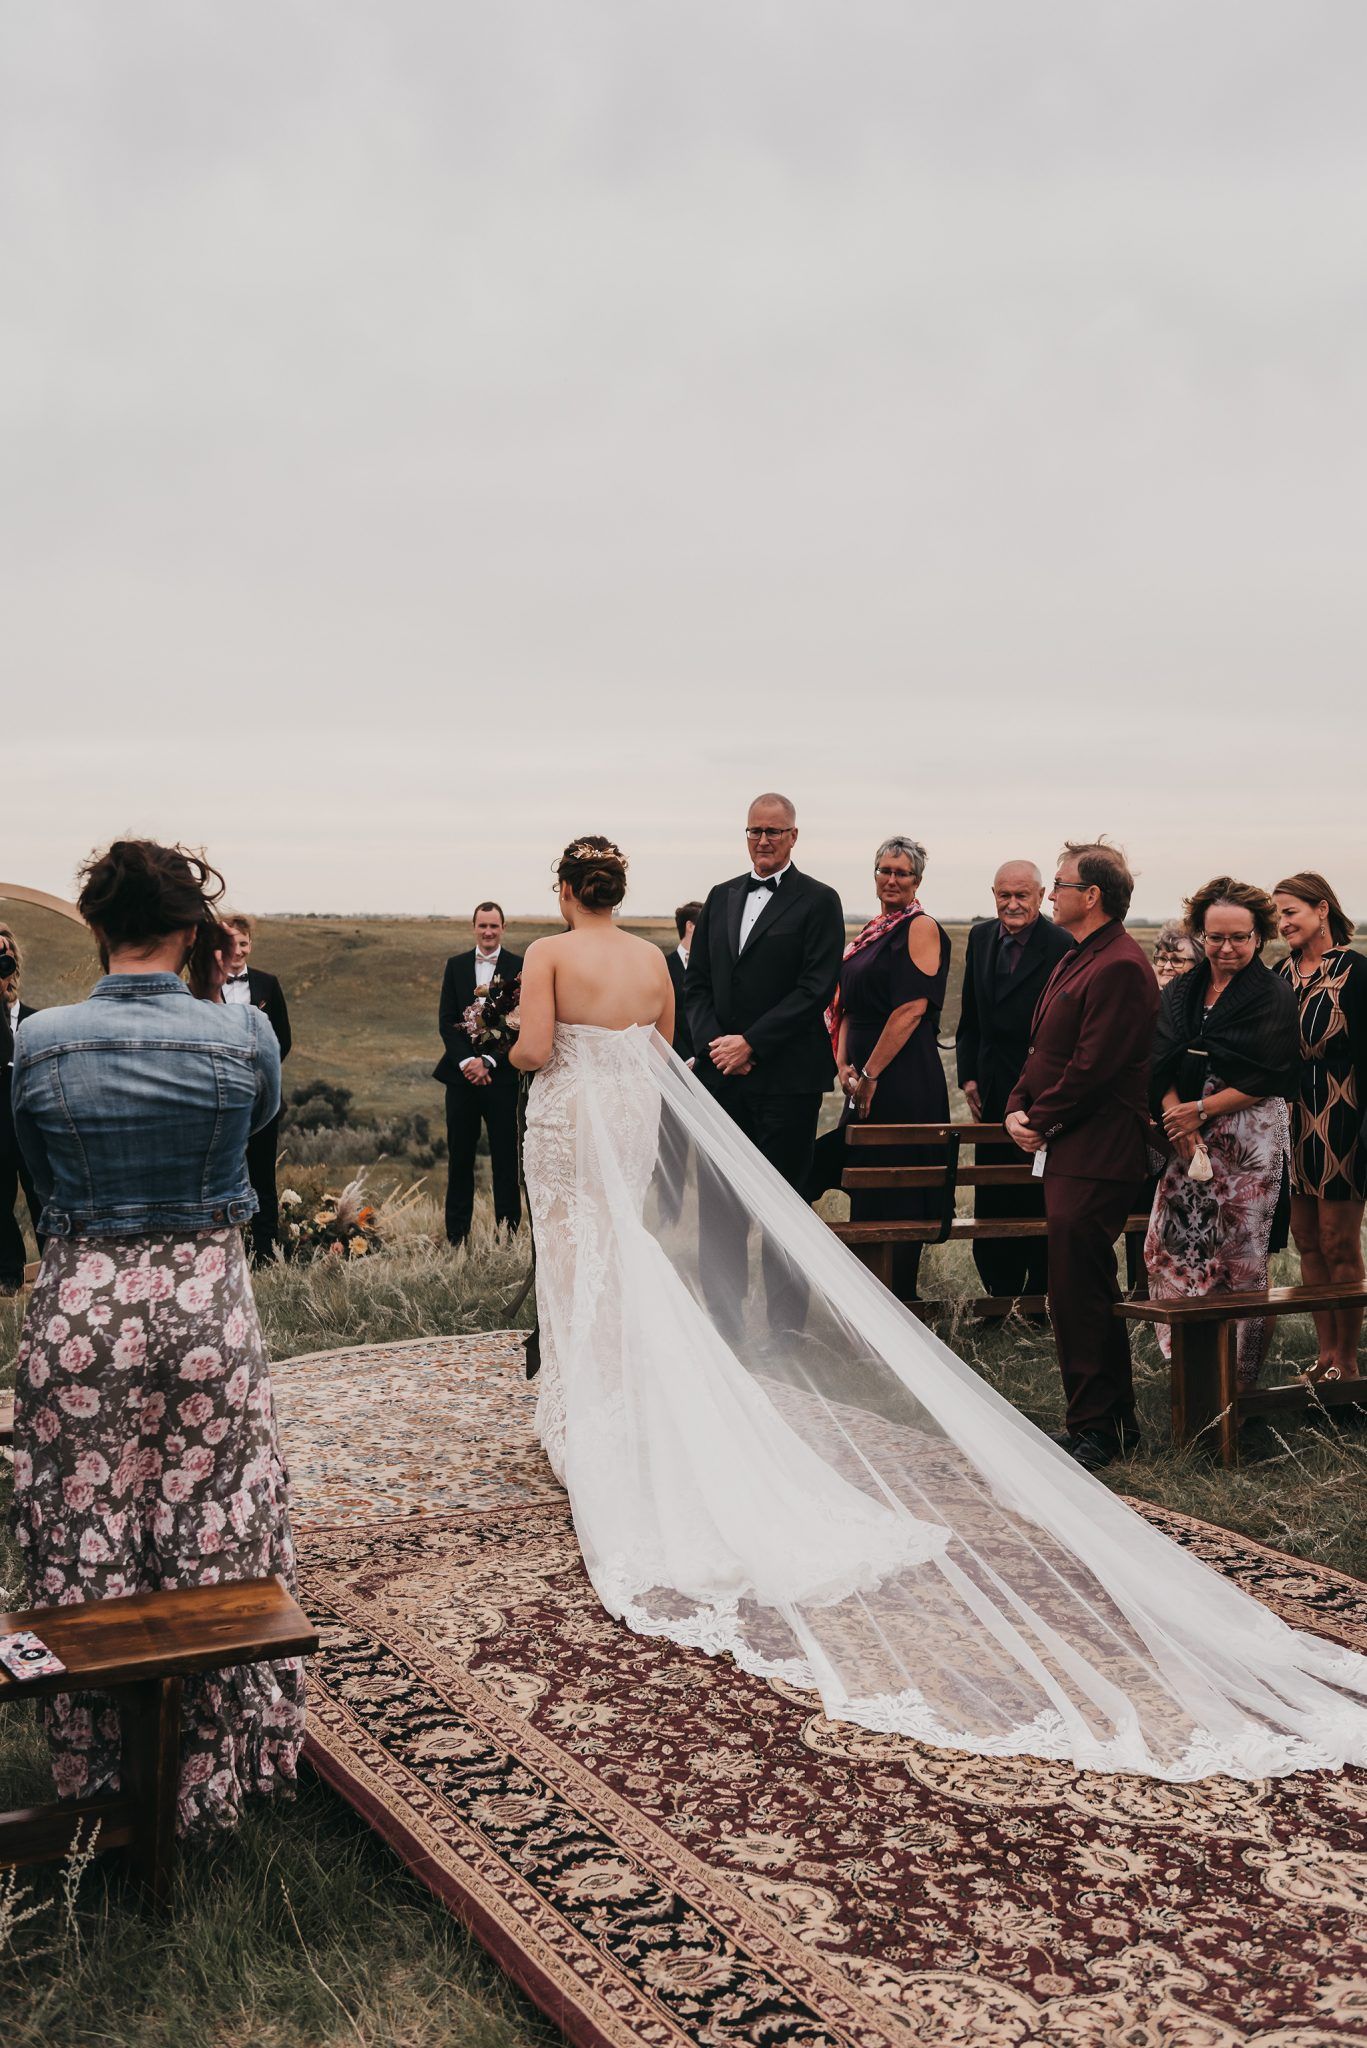 Real Wedding - Countryside Nuptials & Moroccan Styled Reception - featured on Junebug and Bronte Bride, romantic wedding, outdoor valley ceremony